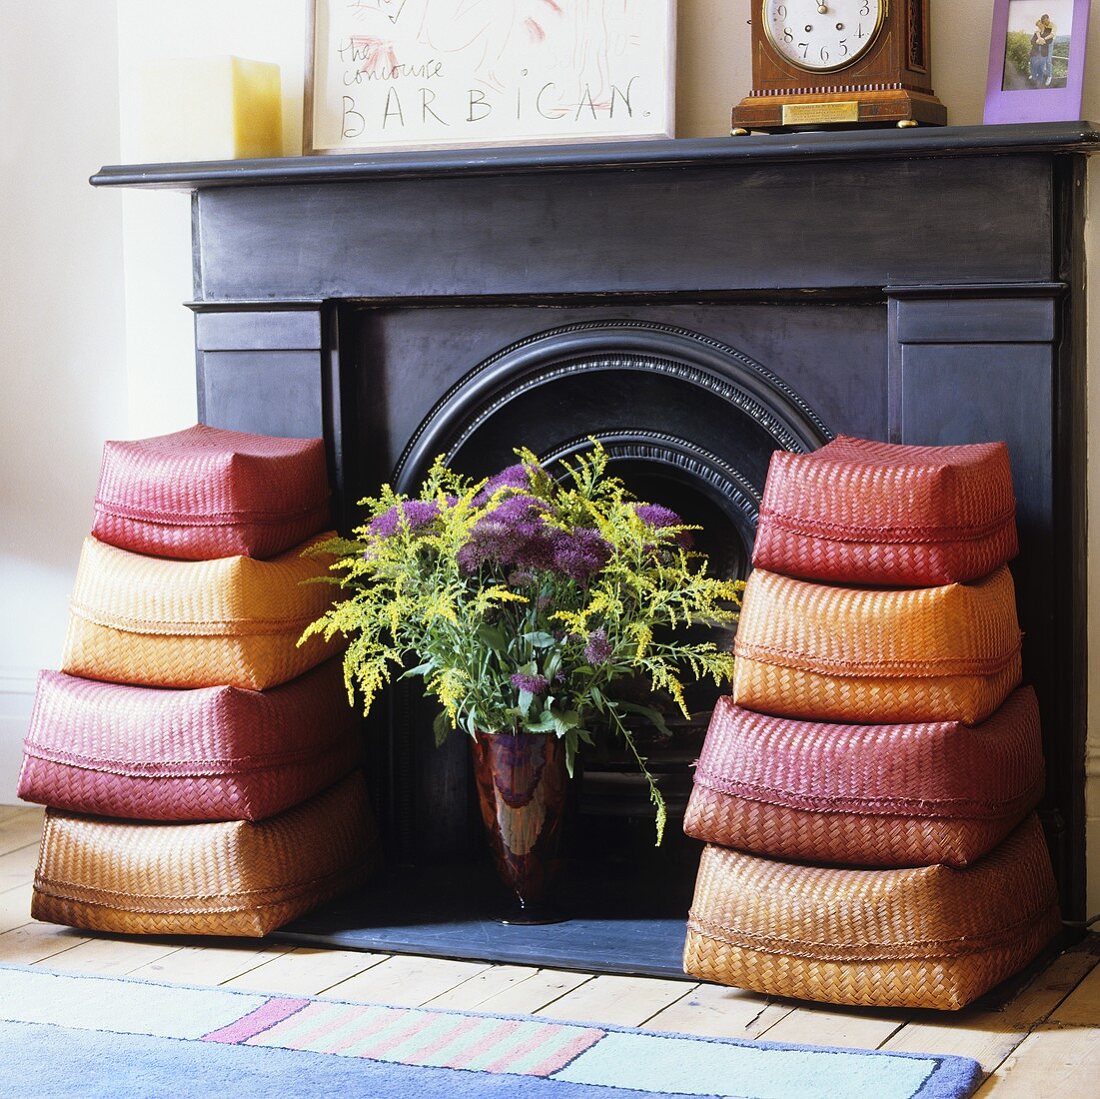 Two sets of colourful sisal baskets and a vase of flowers in front of a dark wood panelled fireplace